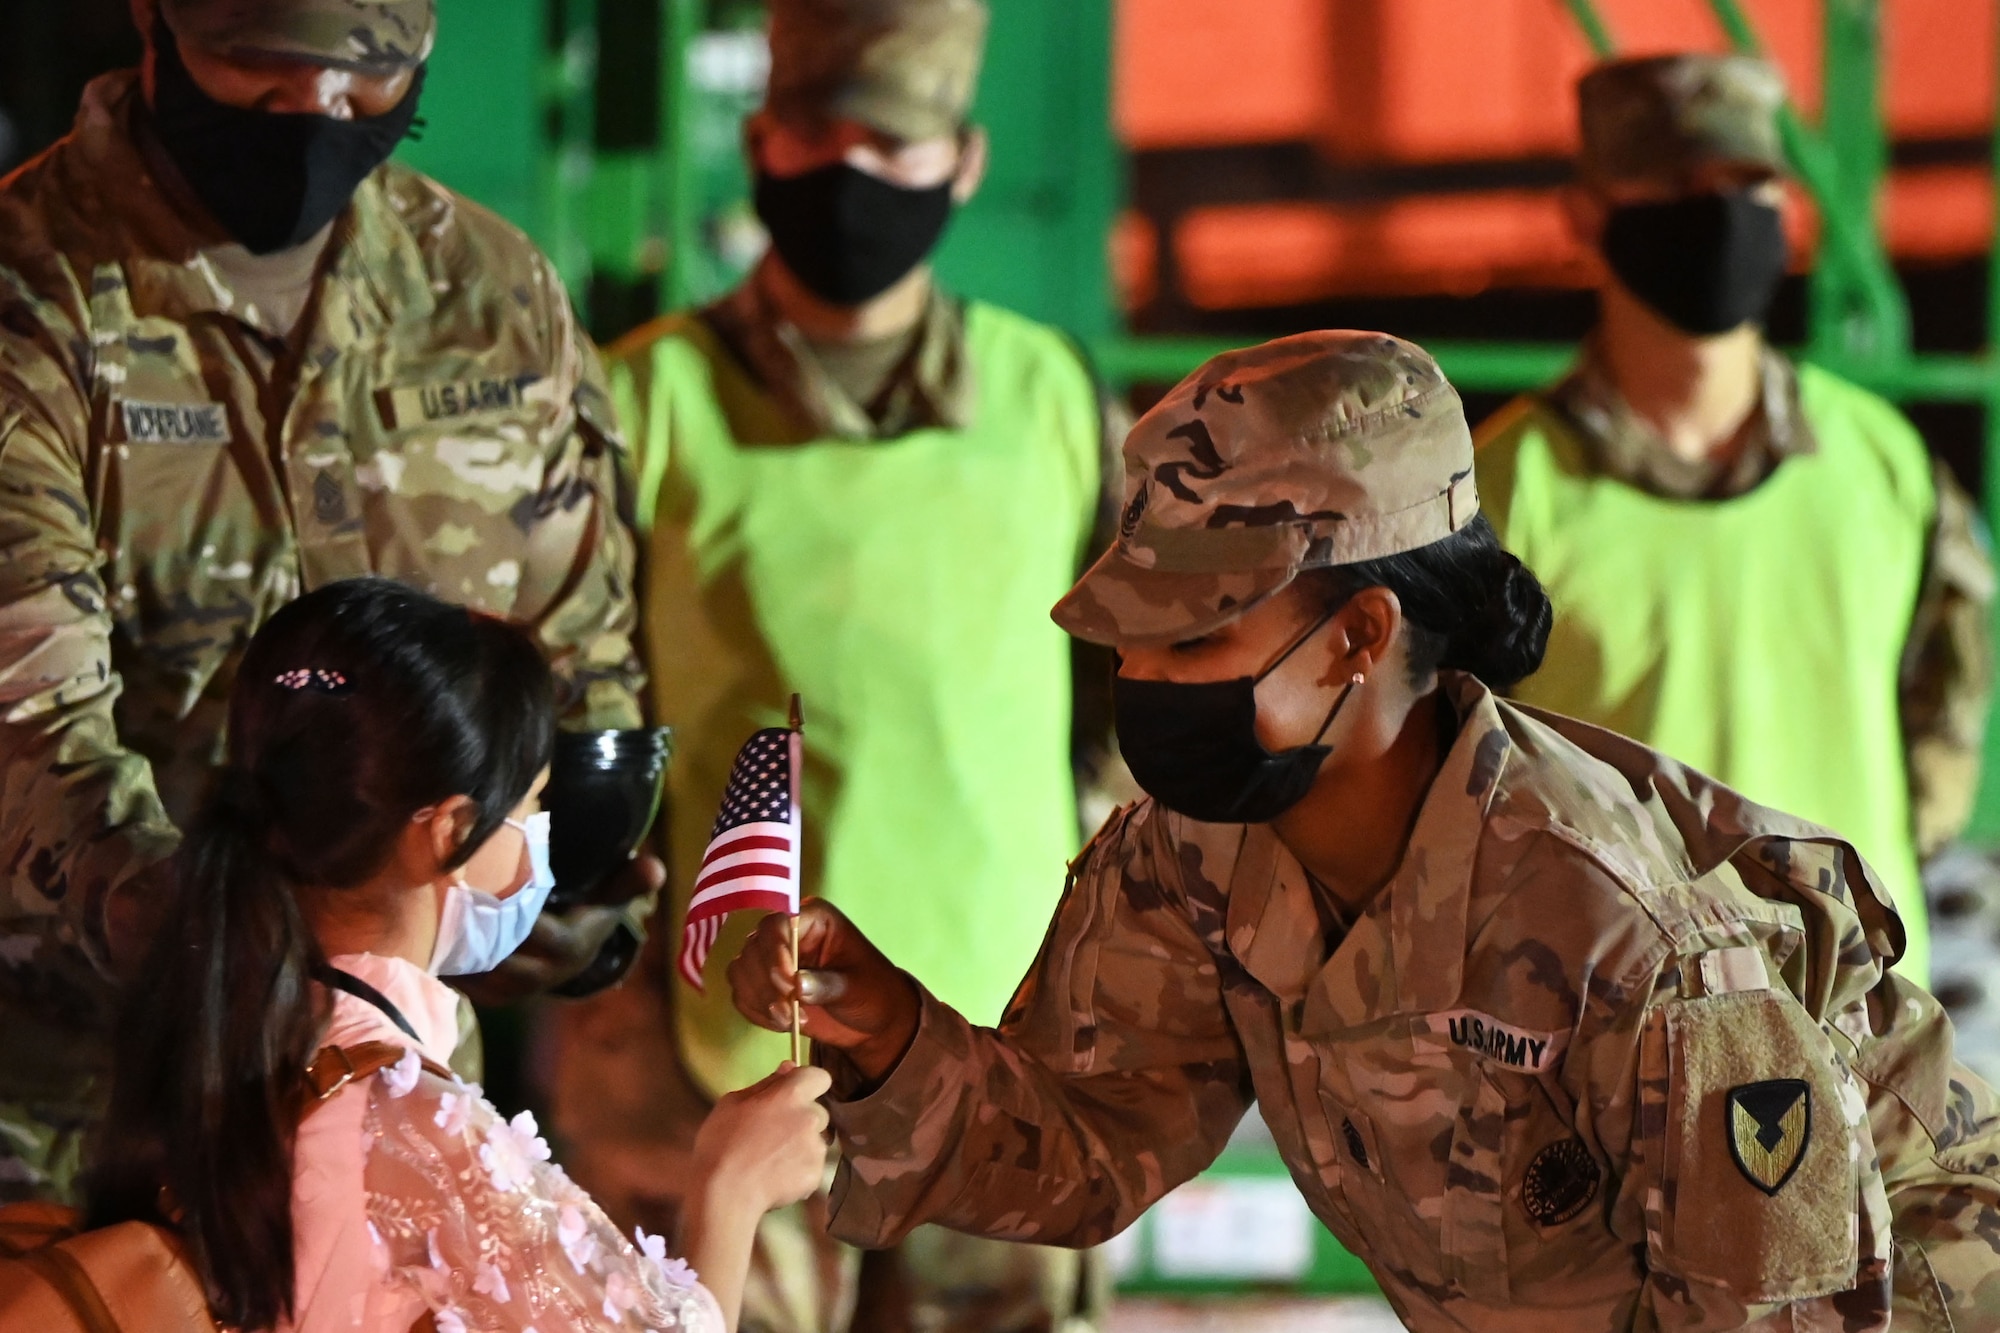 A soldier hands a U.S. flag to a child.